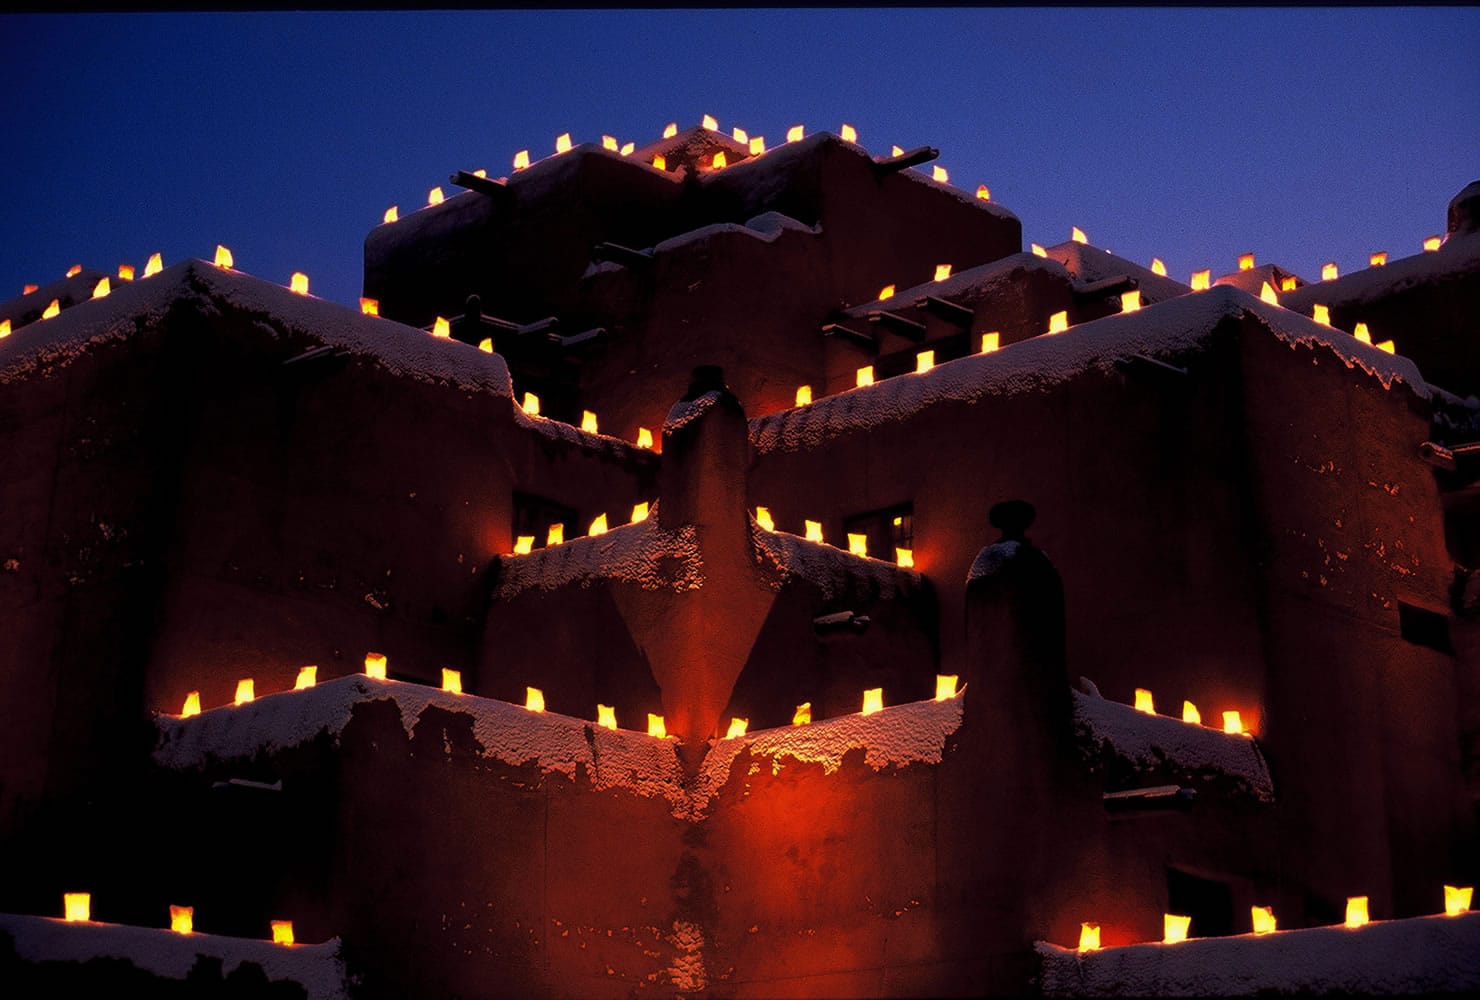 Photos from the New Mexico Tourism Department
Farolitos, which are candles in paper bags, flicker in the night atop Santa Fe's Inn at Loretto. Farolito lanterns, also called luminarias, are a New Mexico holiday tradition.